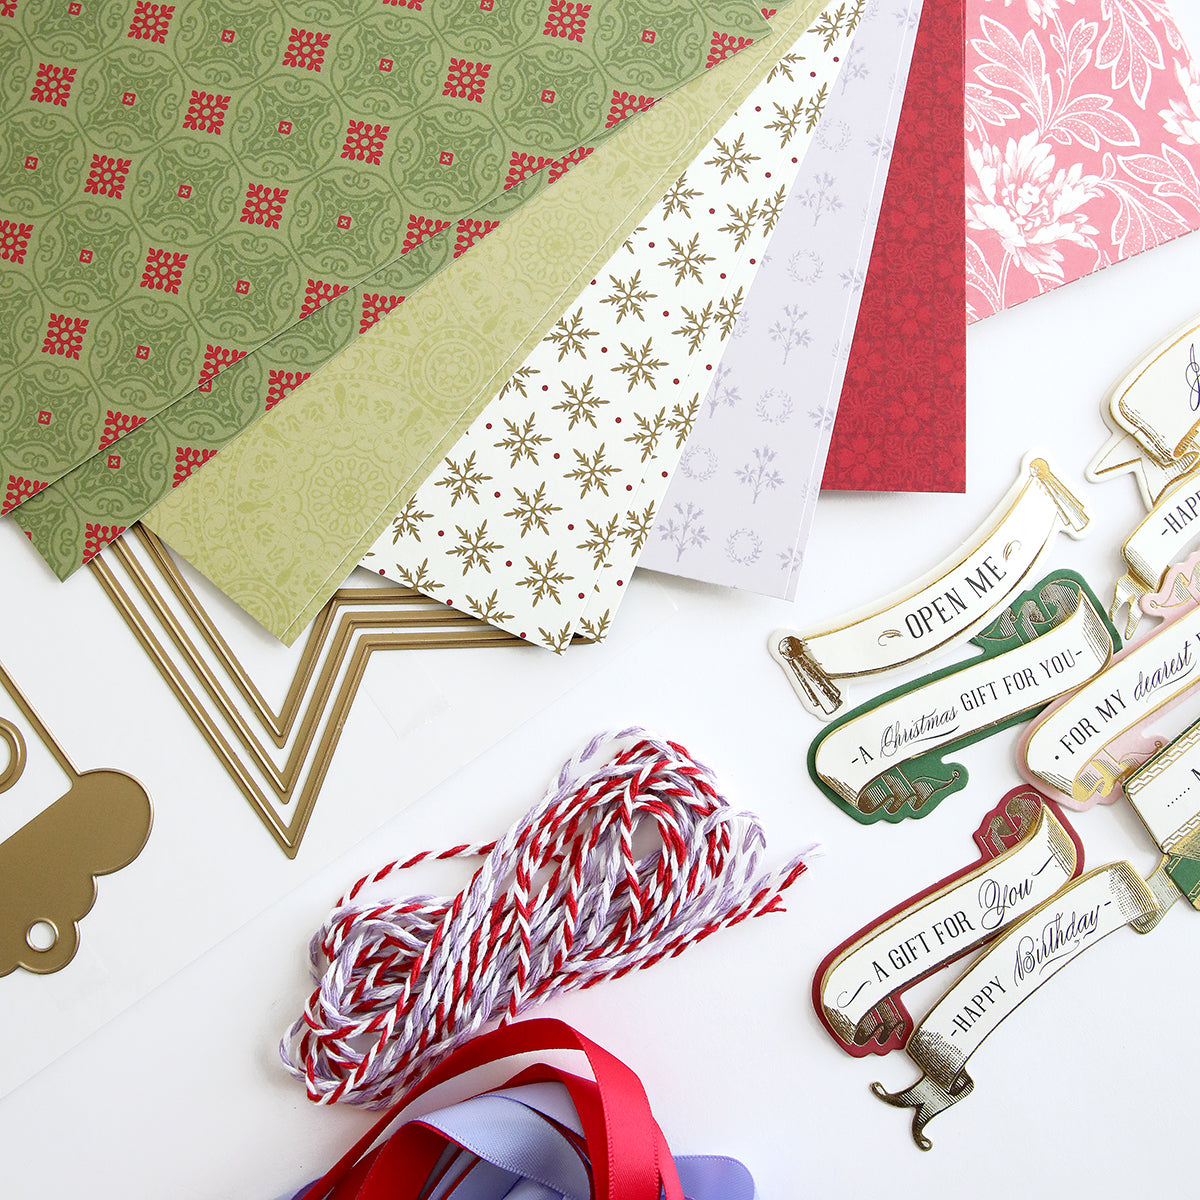 A variety of Anna Griffin Christmas gift papers and ribbons are laid out on a table.